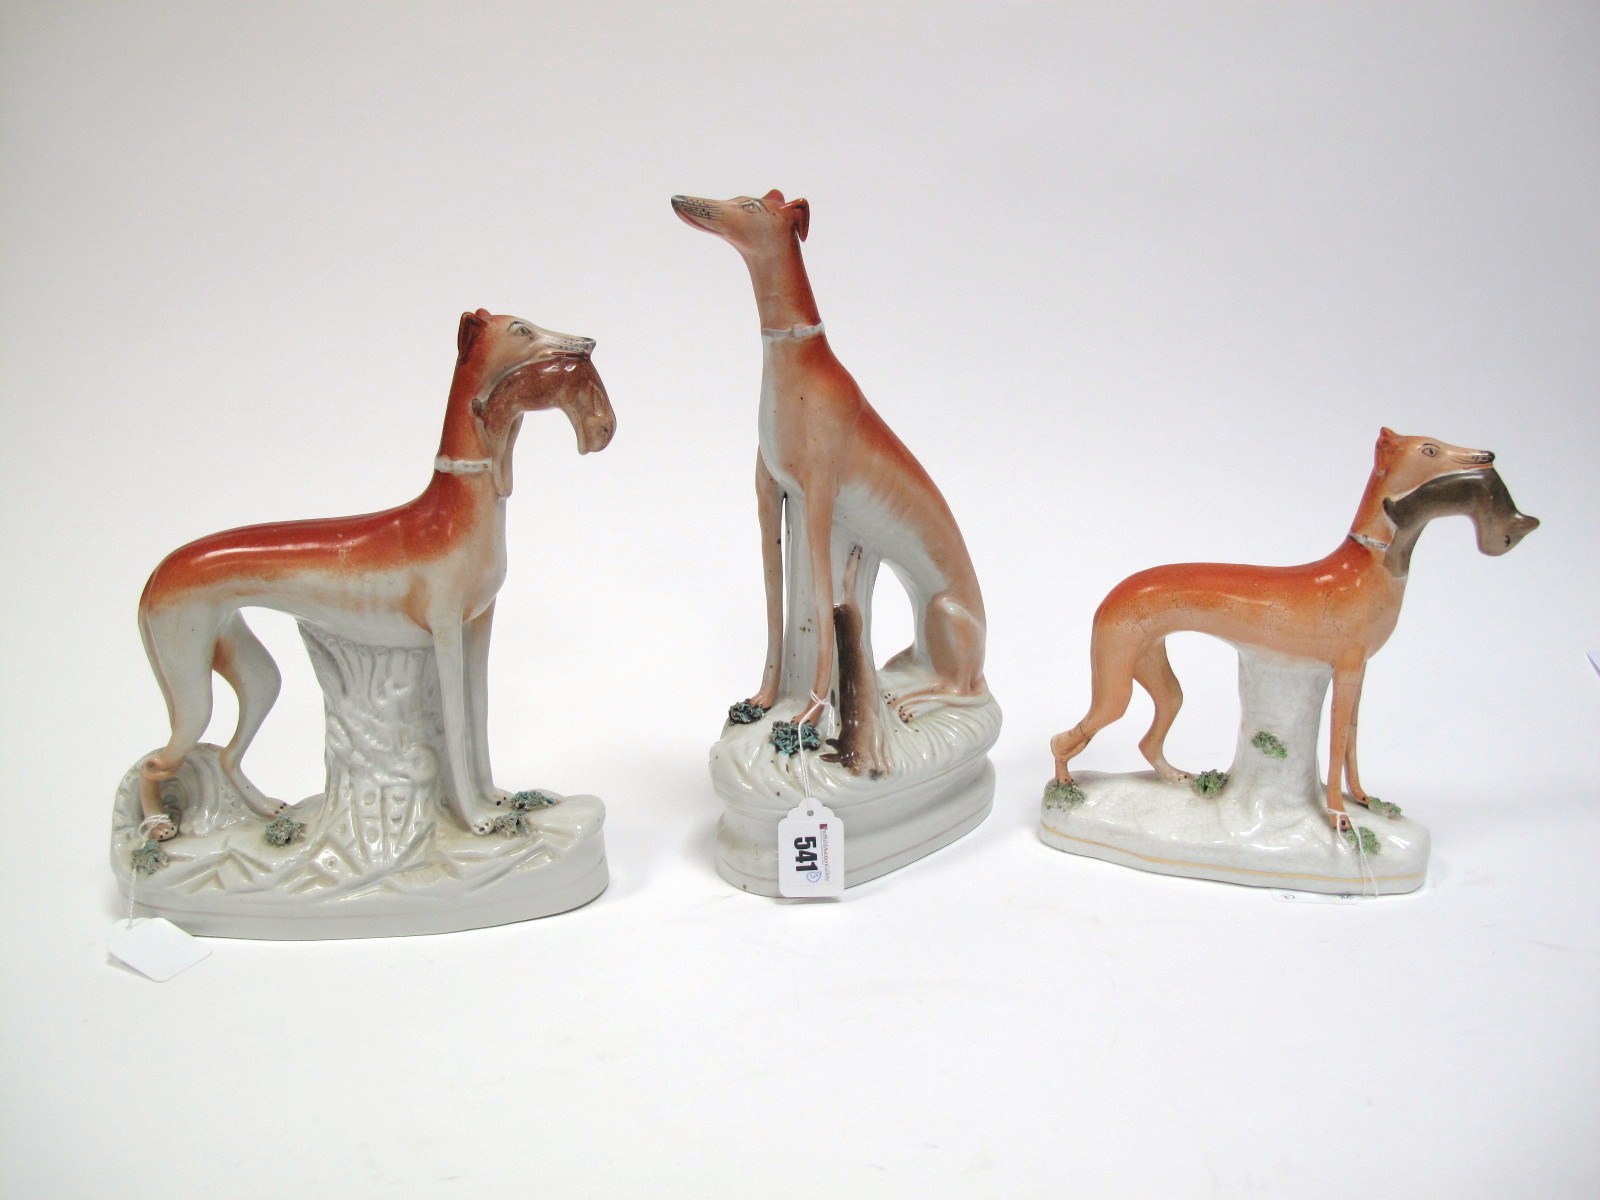 A XIX Century Staffordshire Pottery Greyhound Dog, hind legs squatting, with game by its side, on